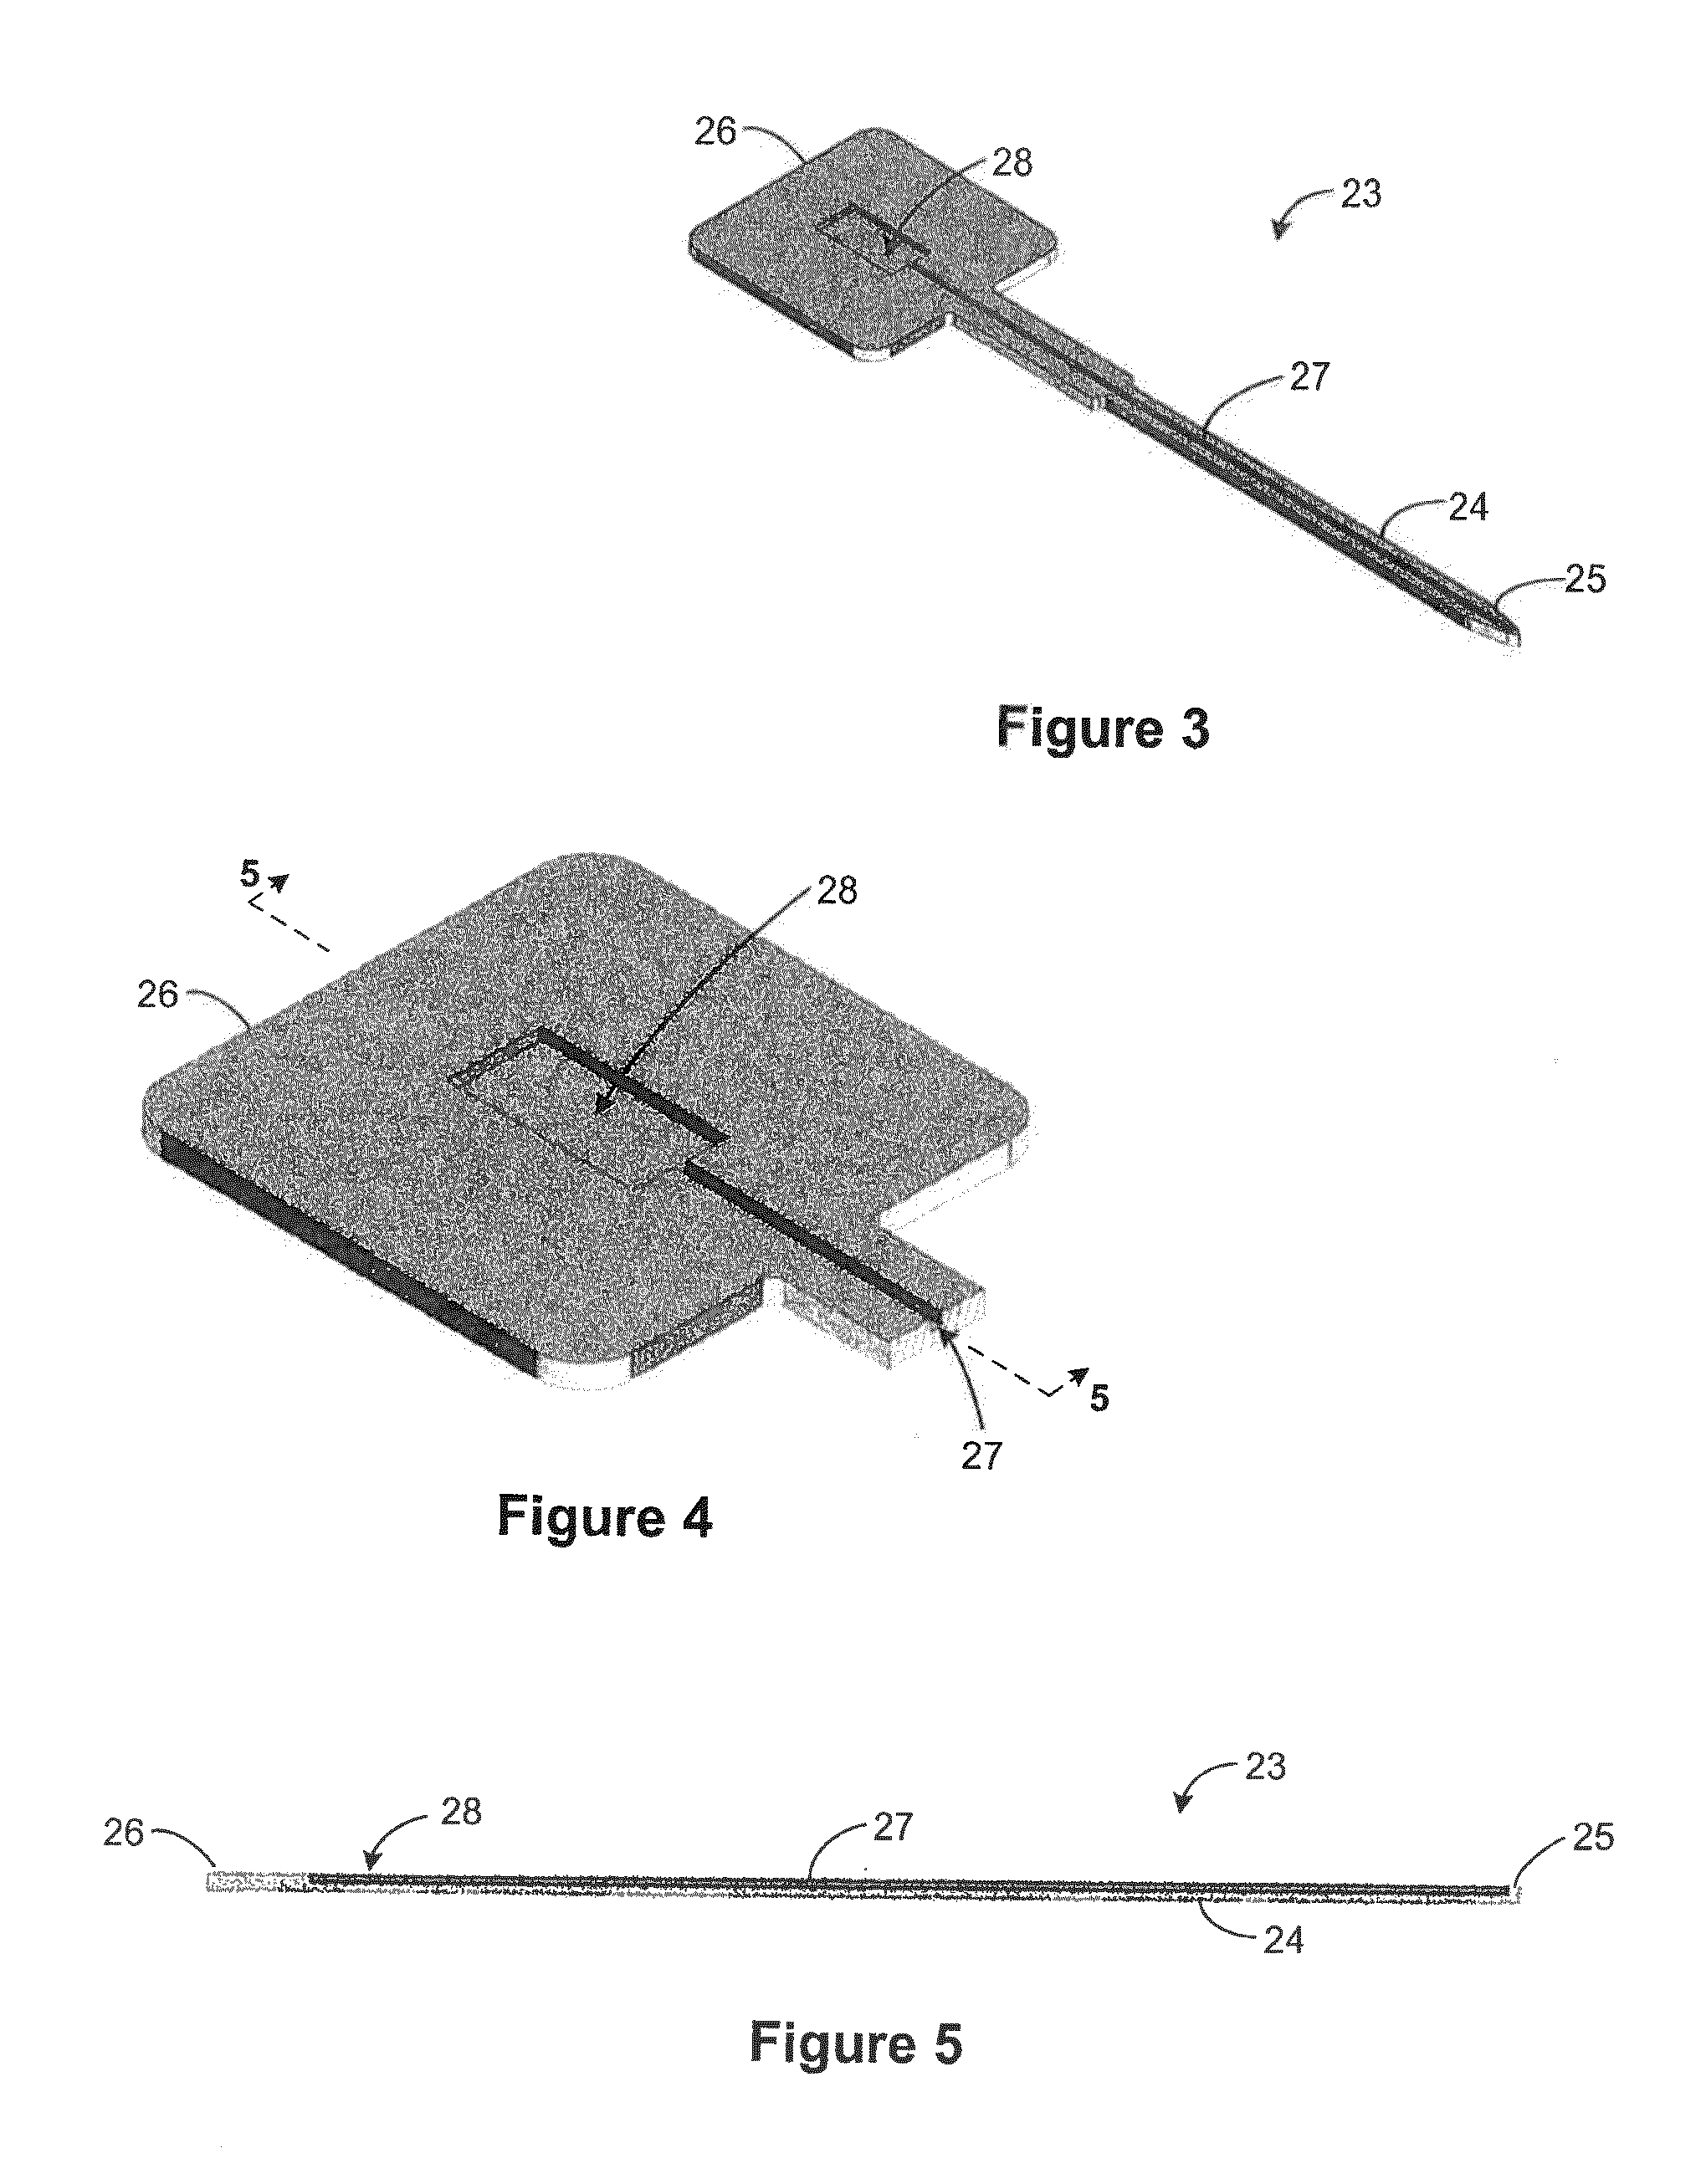 Rigid stiffener-reinforced flexible neural probes, and methods of fabrication using wicking channel-distributed adhesives and tissue insertion and extraction